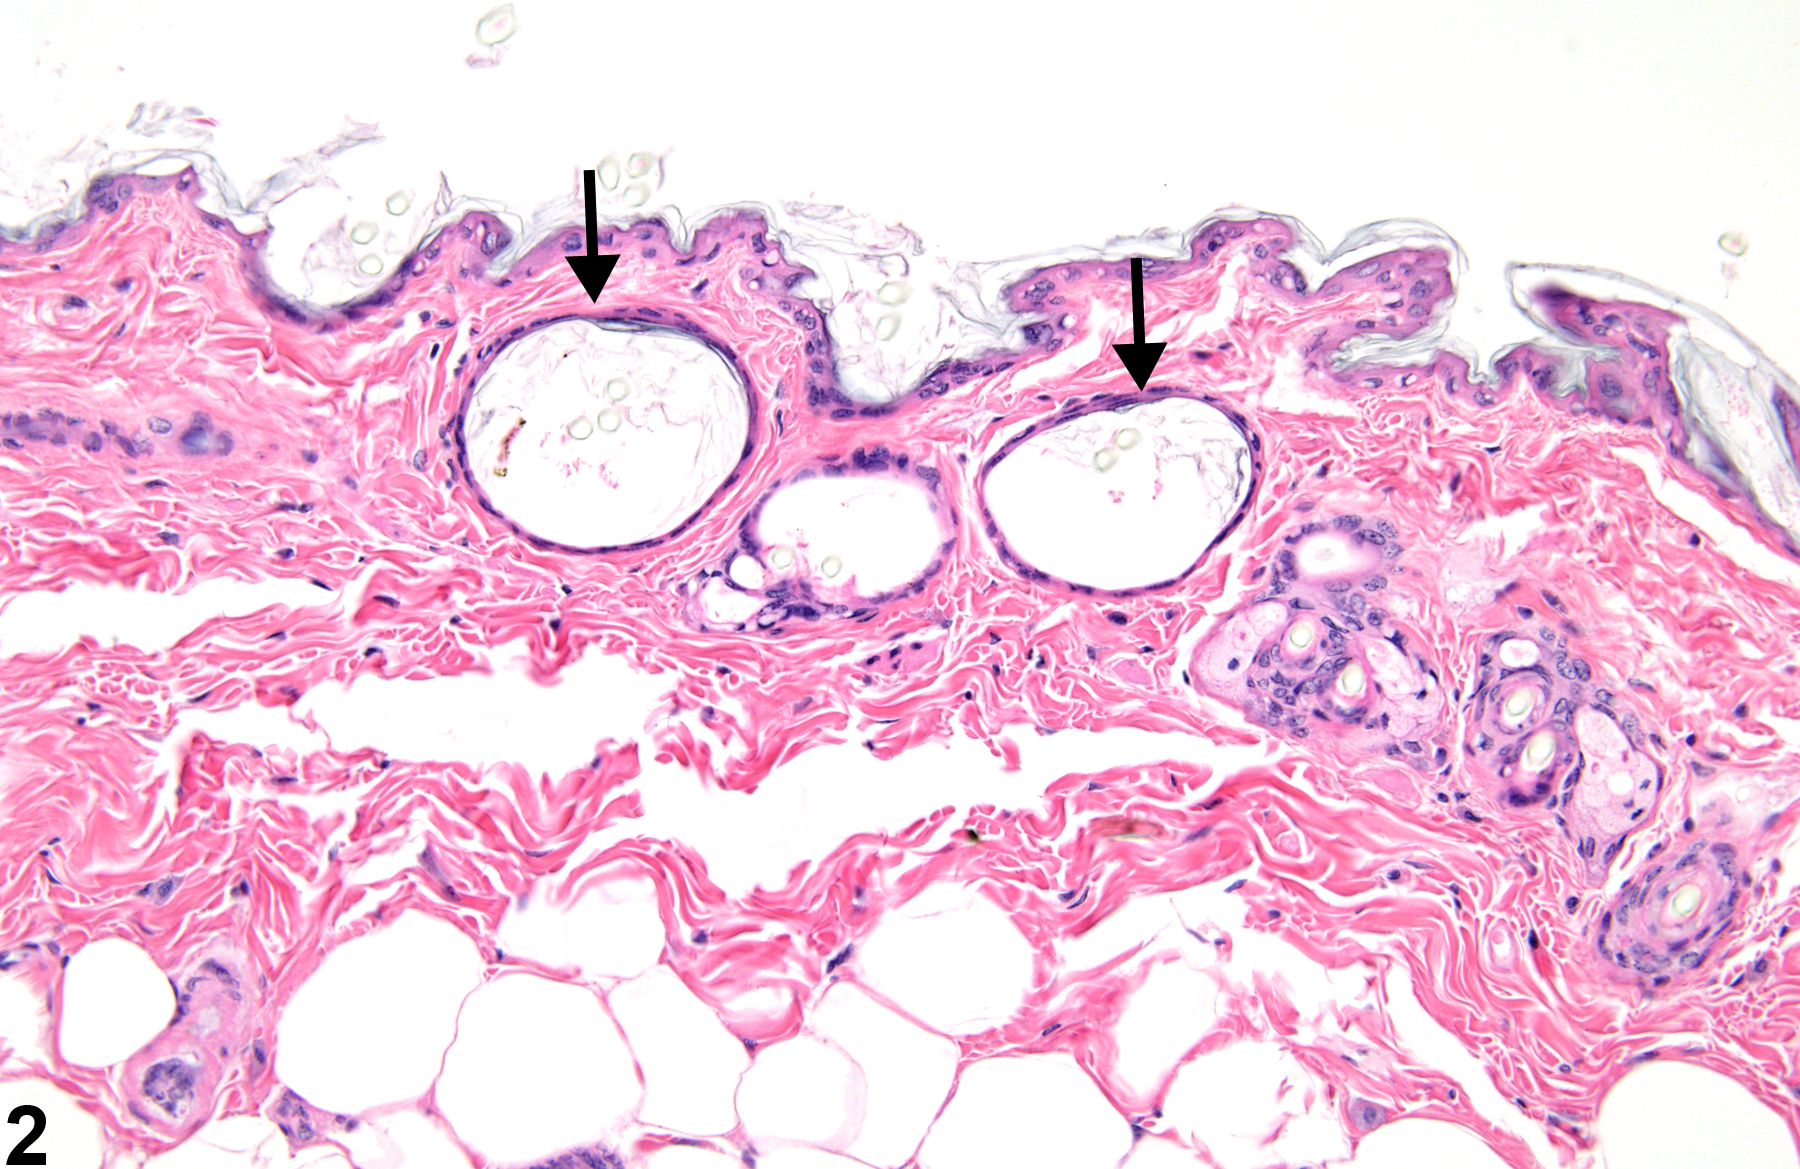 Image of dilatation in the skin follicle from a male B6C3F1 mouse in a chronic study